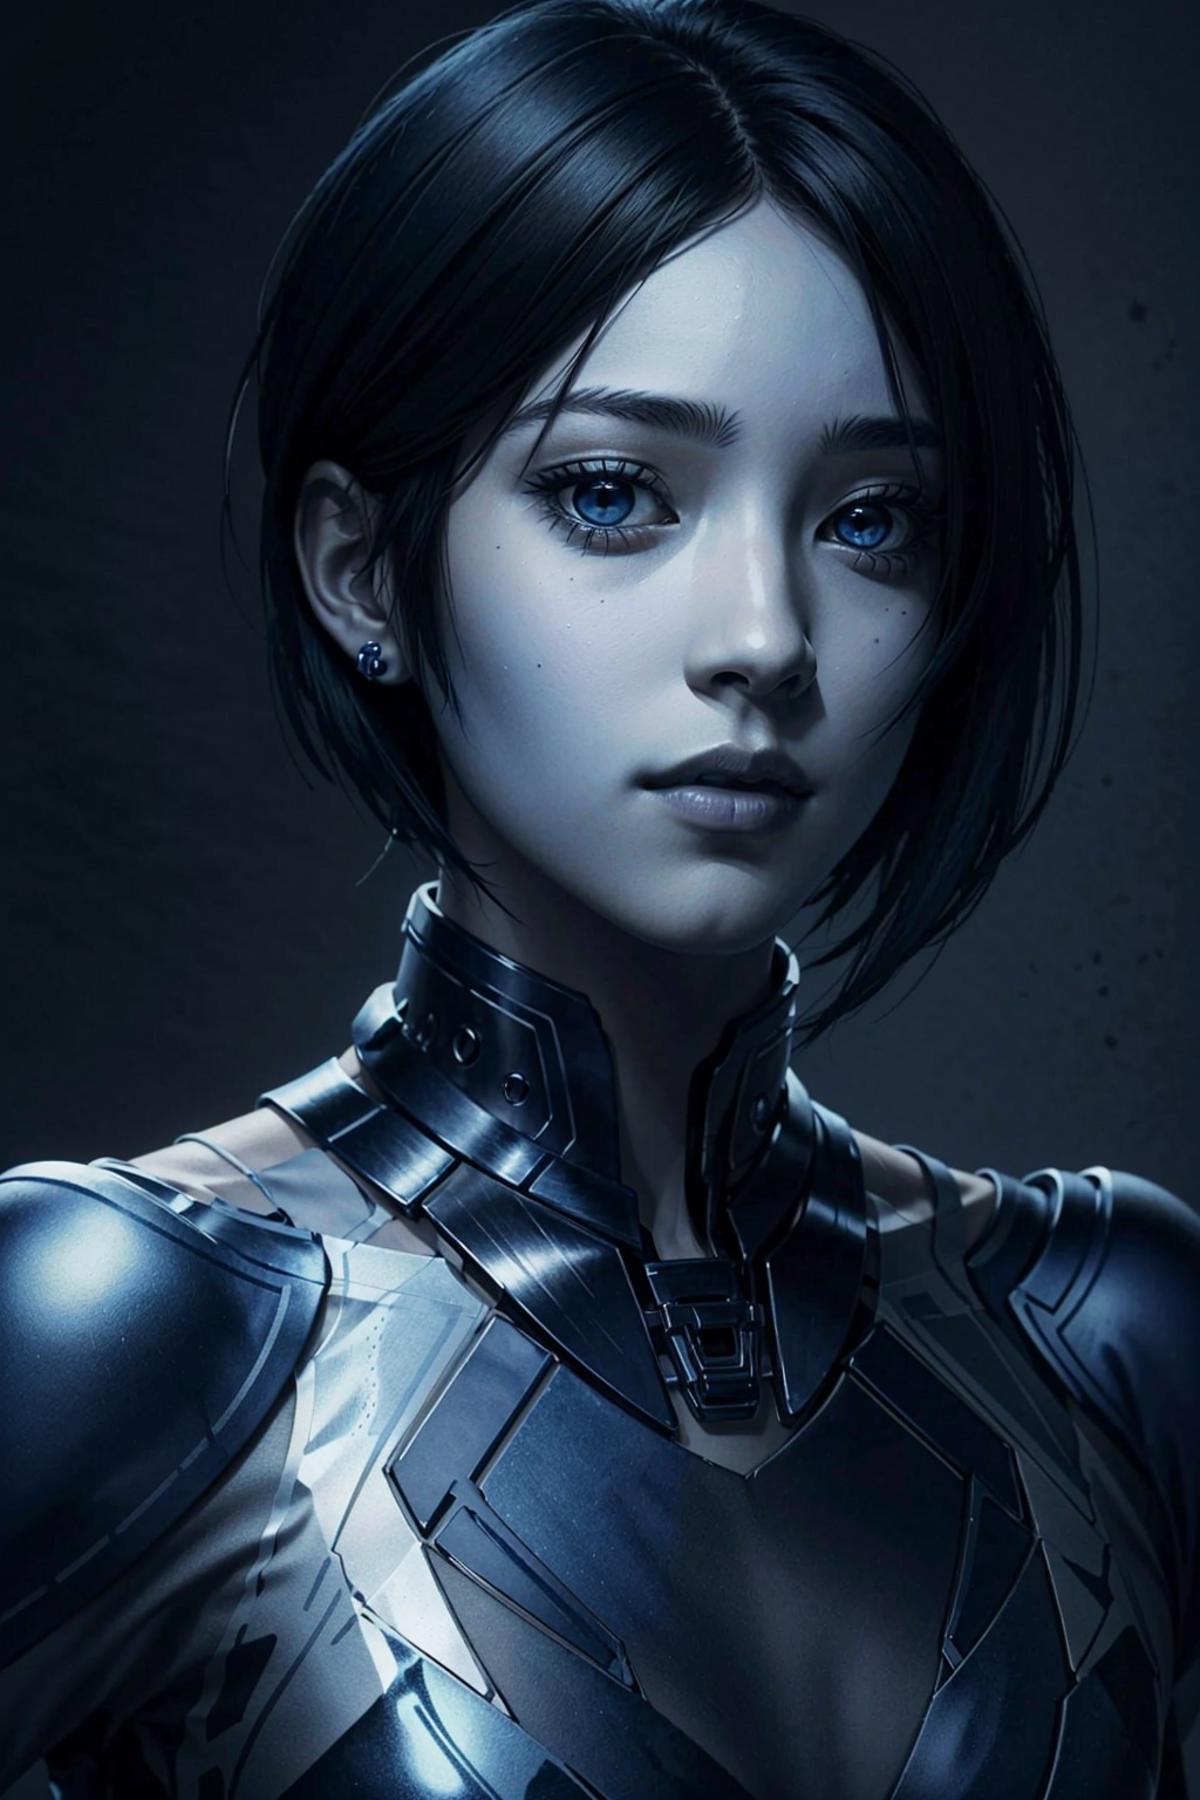 Cortana from Halo image by BloodRedKittie